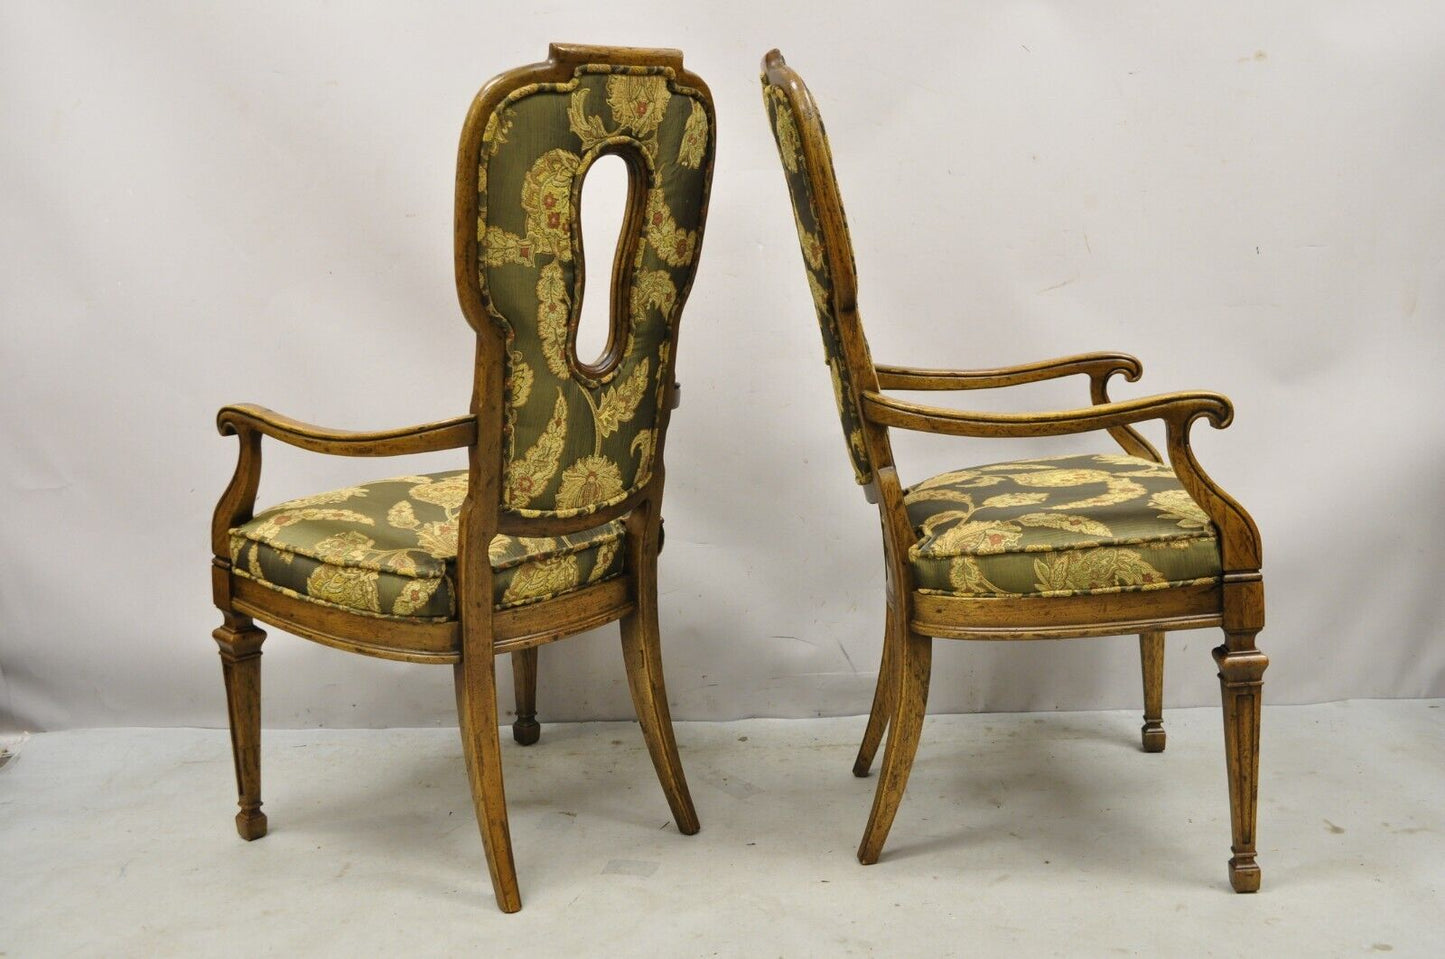 Vintage Hollywood Regency Keyhole Back Fireside Lounge Arm Chairs - a Pair